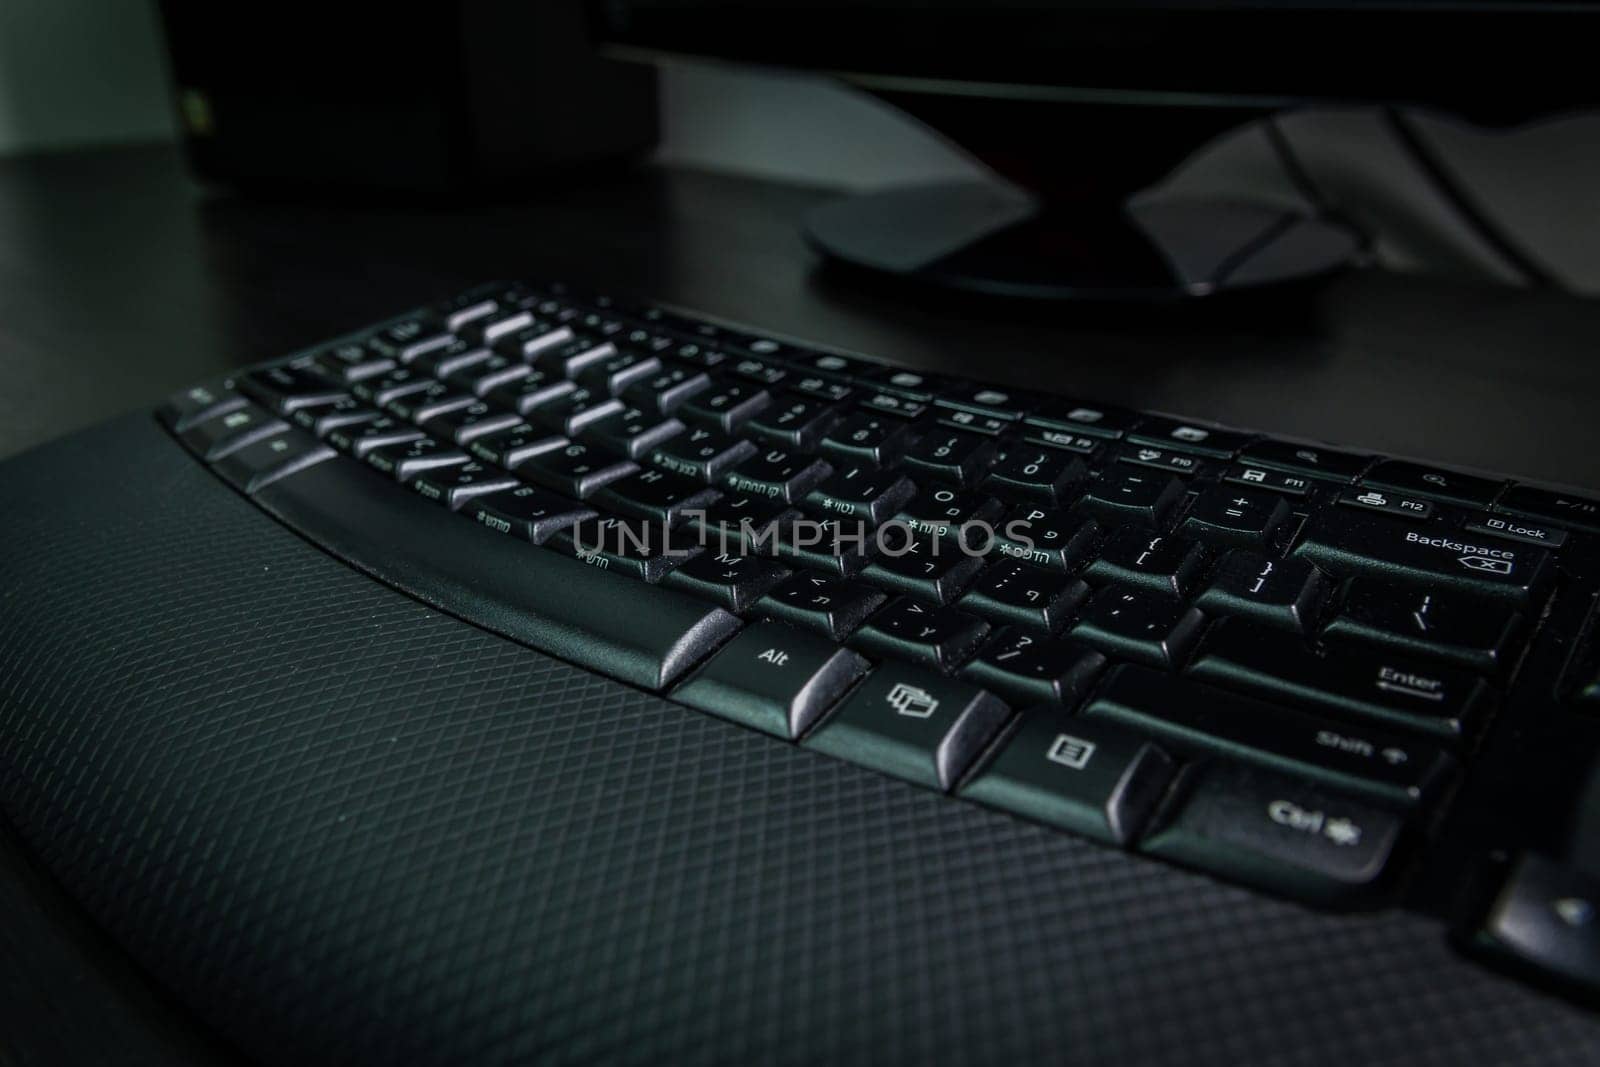 Keyboard with letters in Hebrew and English - Wireless keyboard - Dark atmosphere